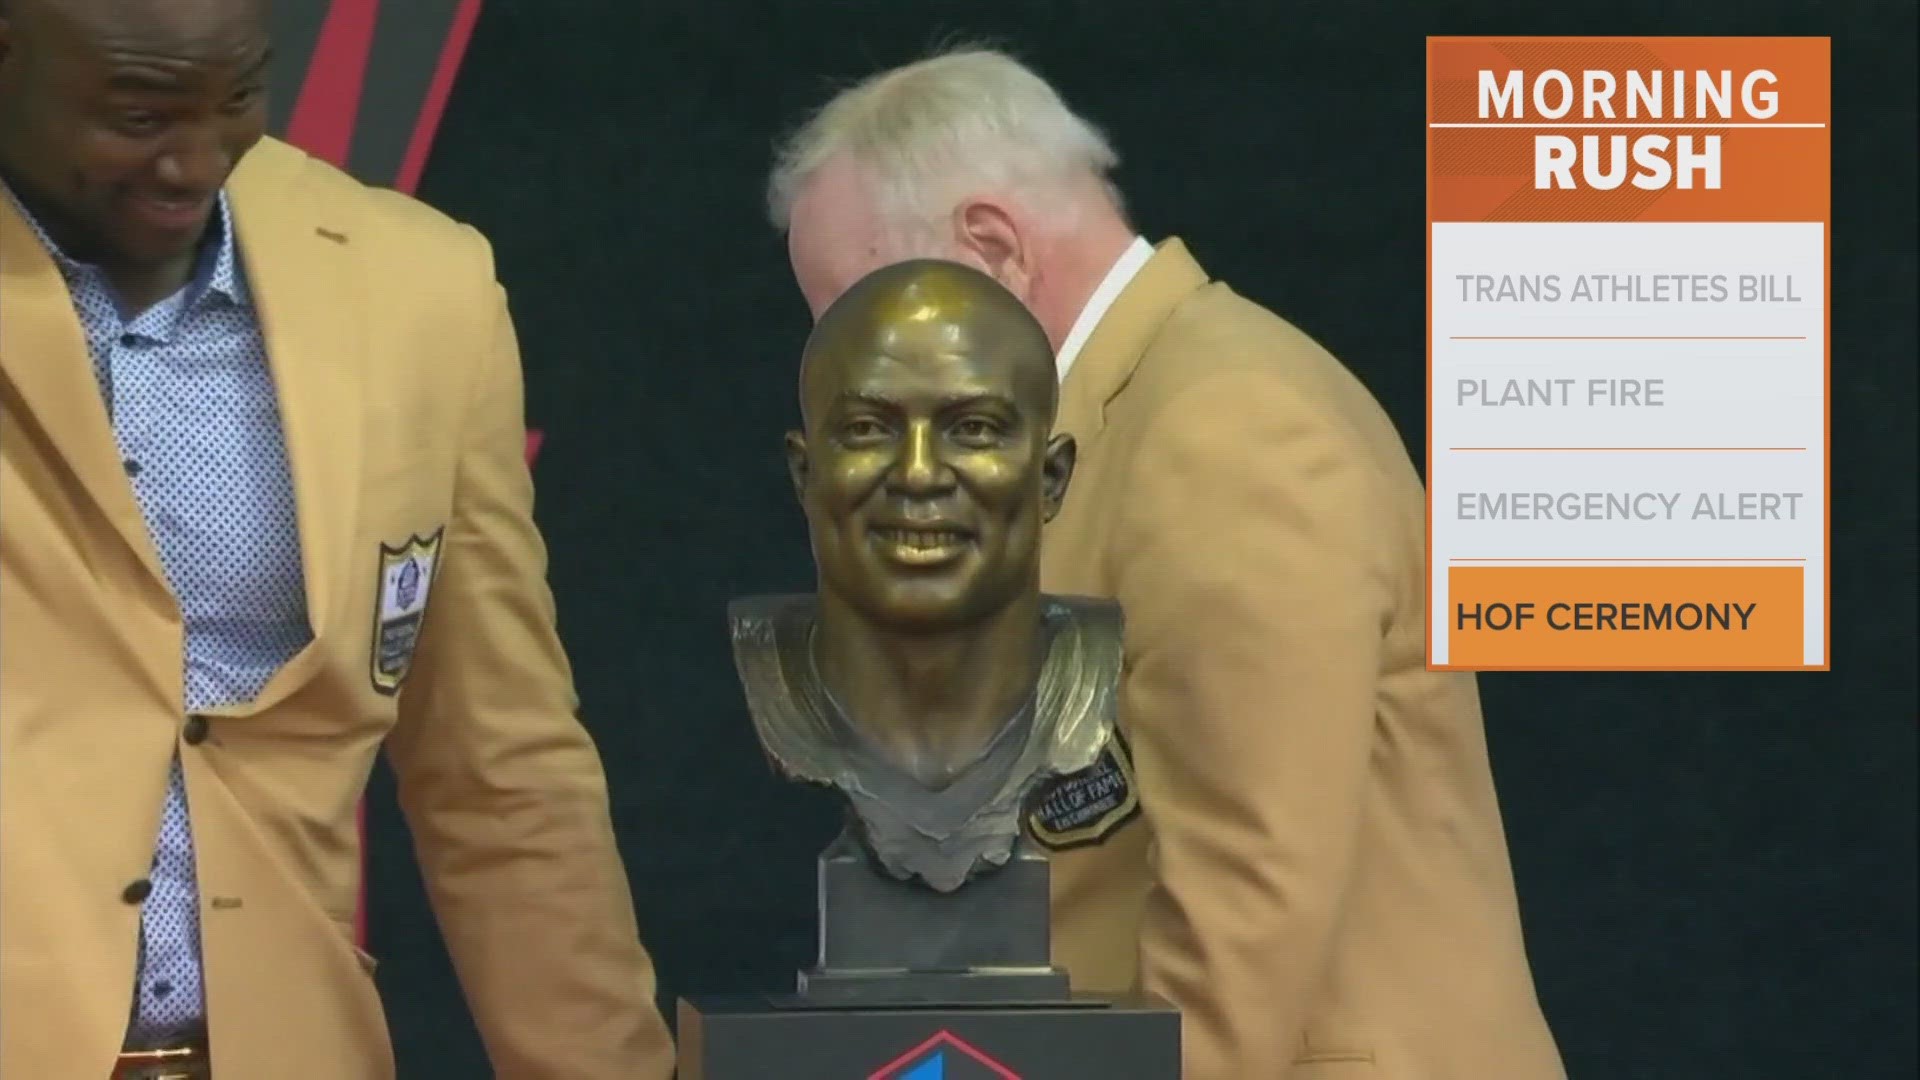 Zach Thomas, a Texas native who briefly played for the Cowboys, was inducted, too. Ware, Howley and Thomas bring Dallas' Hall of Fame representatives to 32.